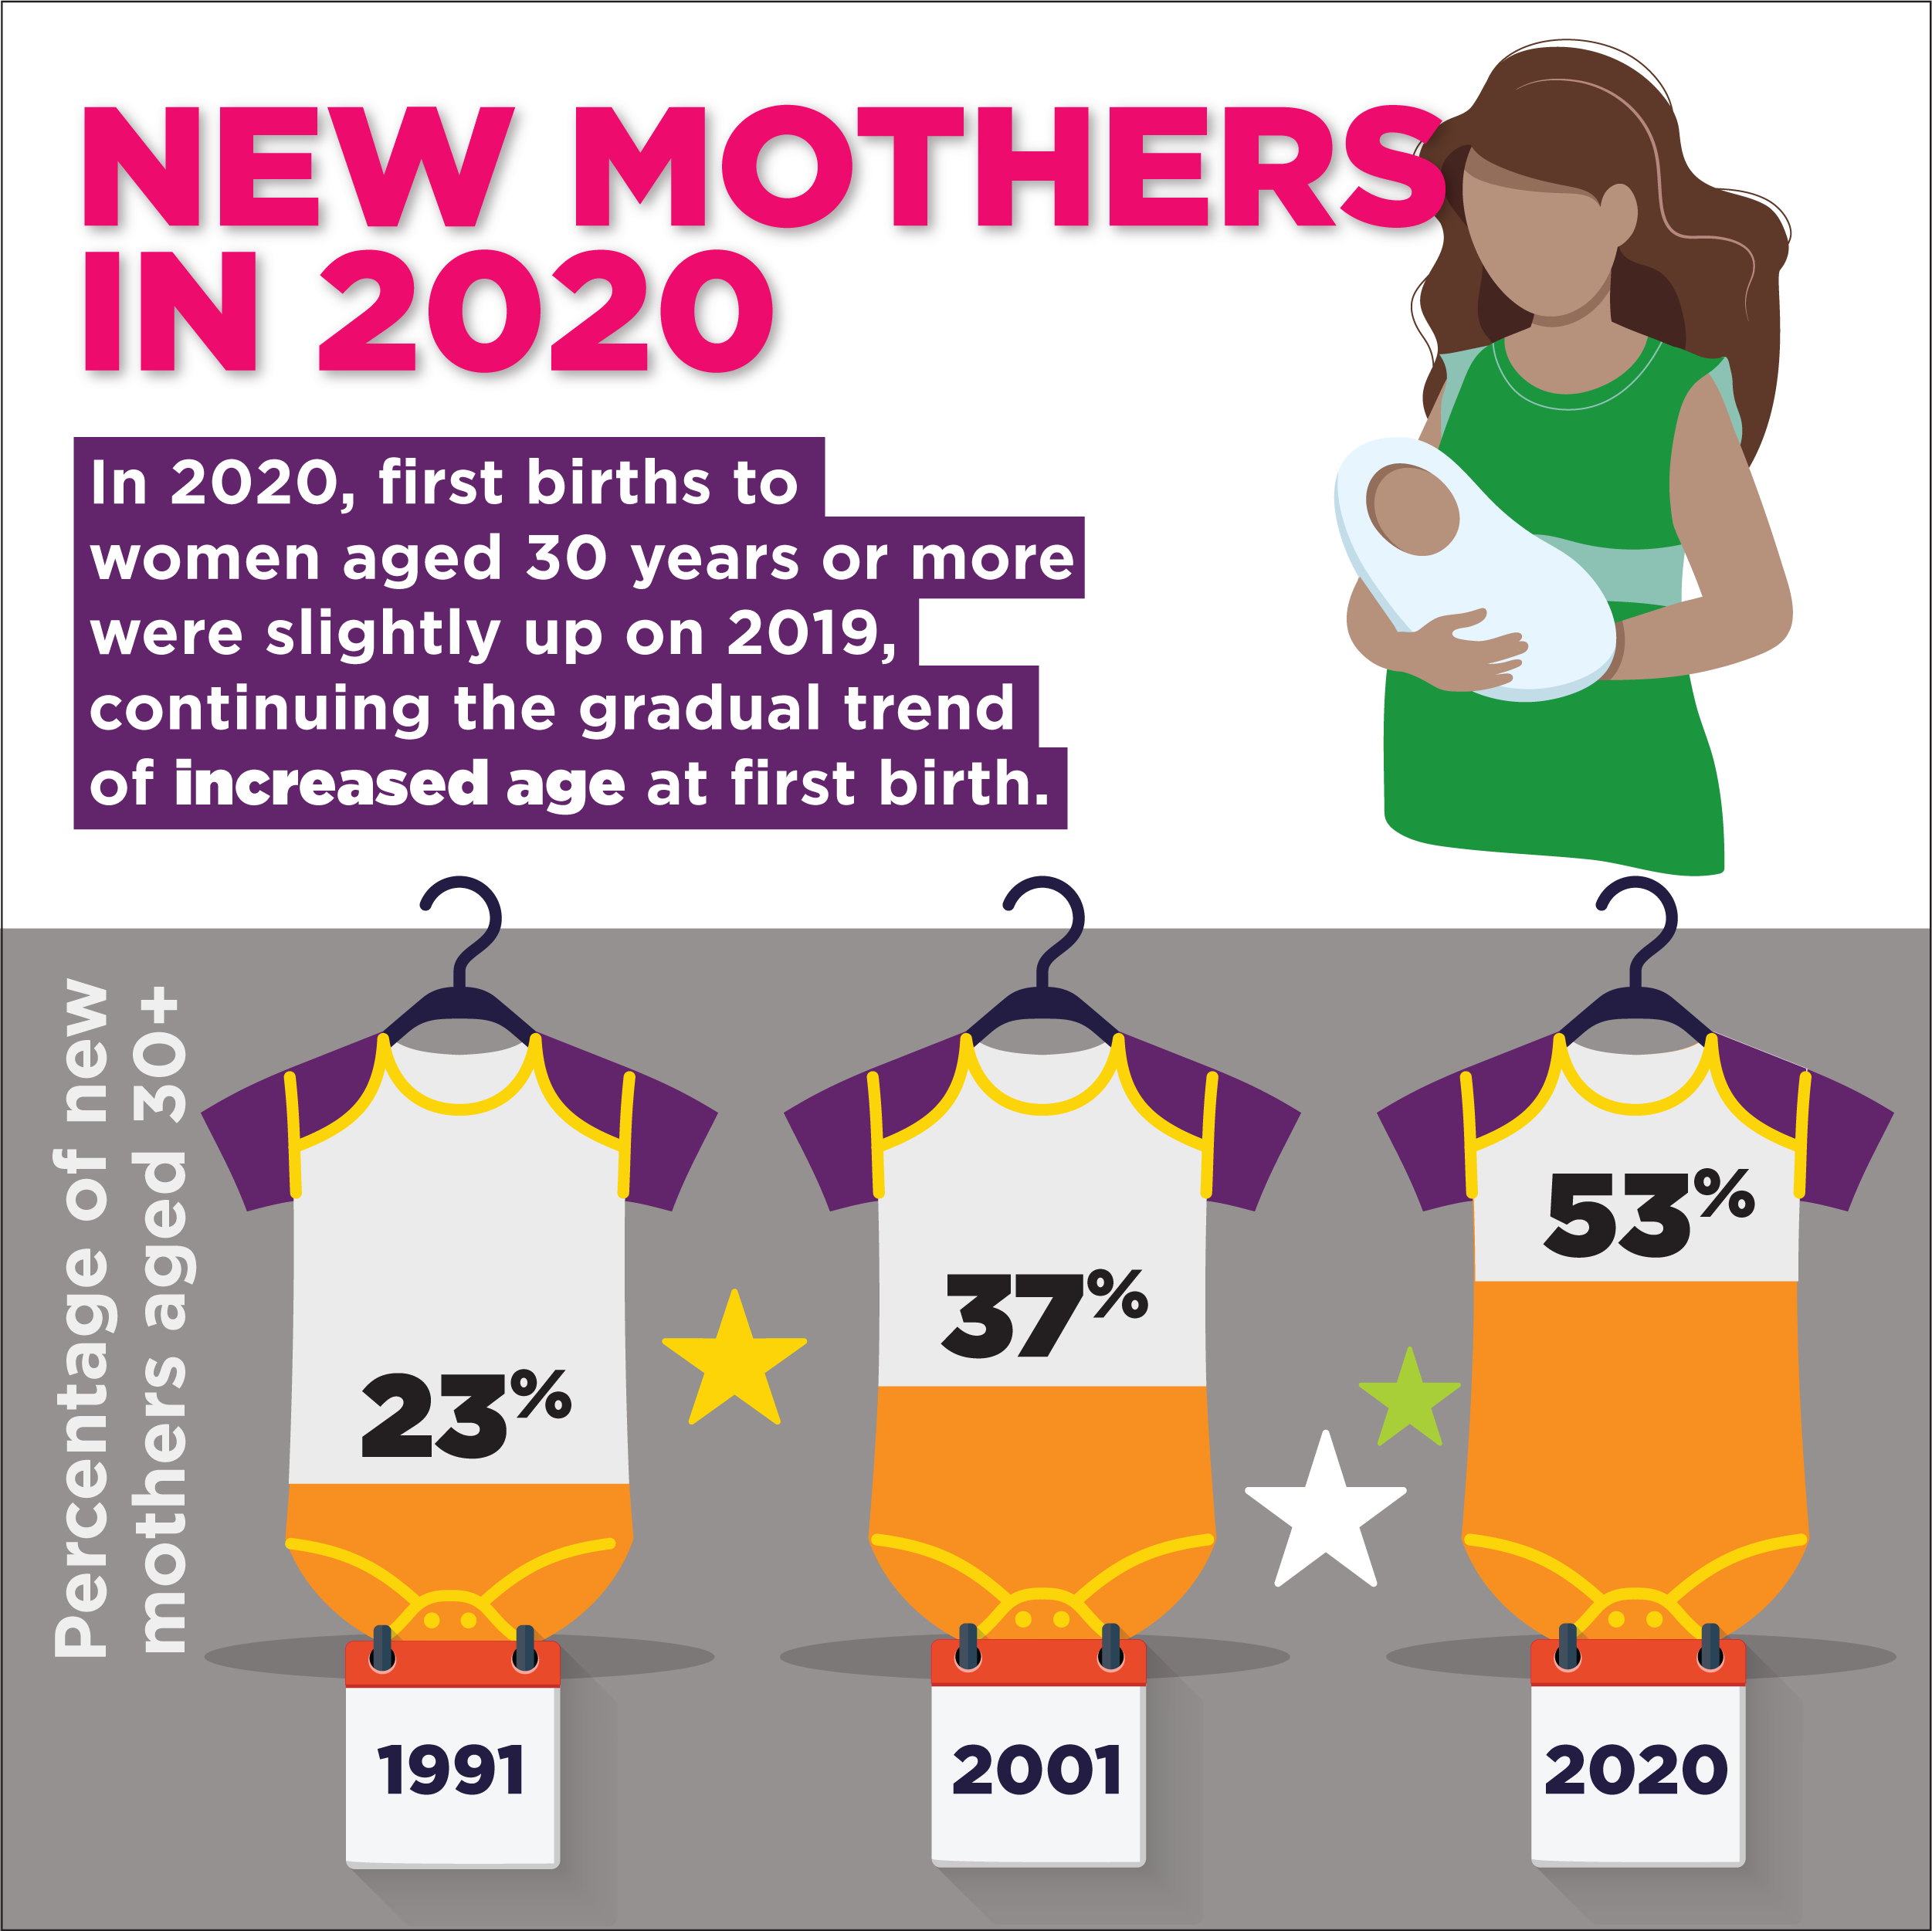 Infographic: New mothers in 2020 - In 2020, first births to women aged 30 years or more were slightly up on 2019, continuing the gradual trend of increased age at first birth. Percentage of new mothers aged 30+: 1991-23%, 2001-37%, 2020-53%